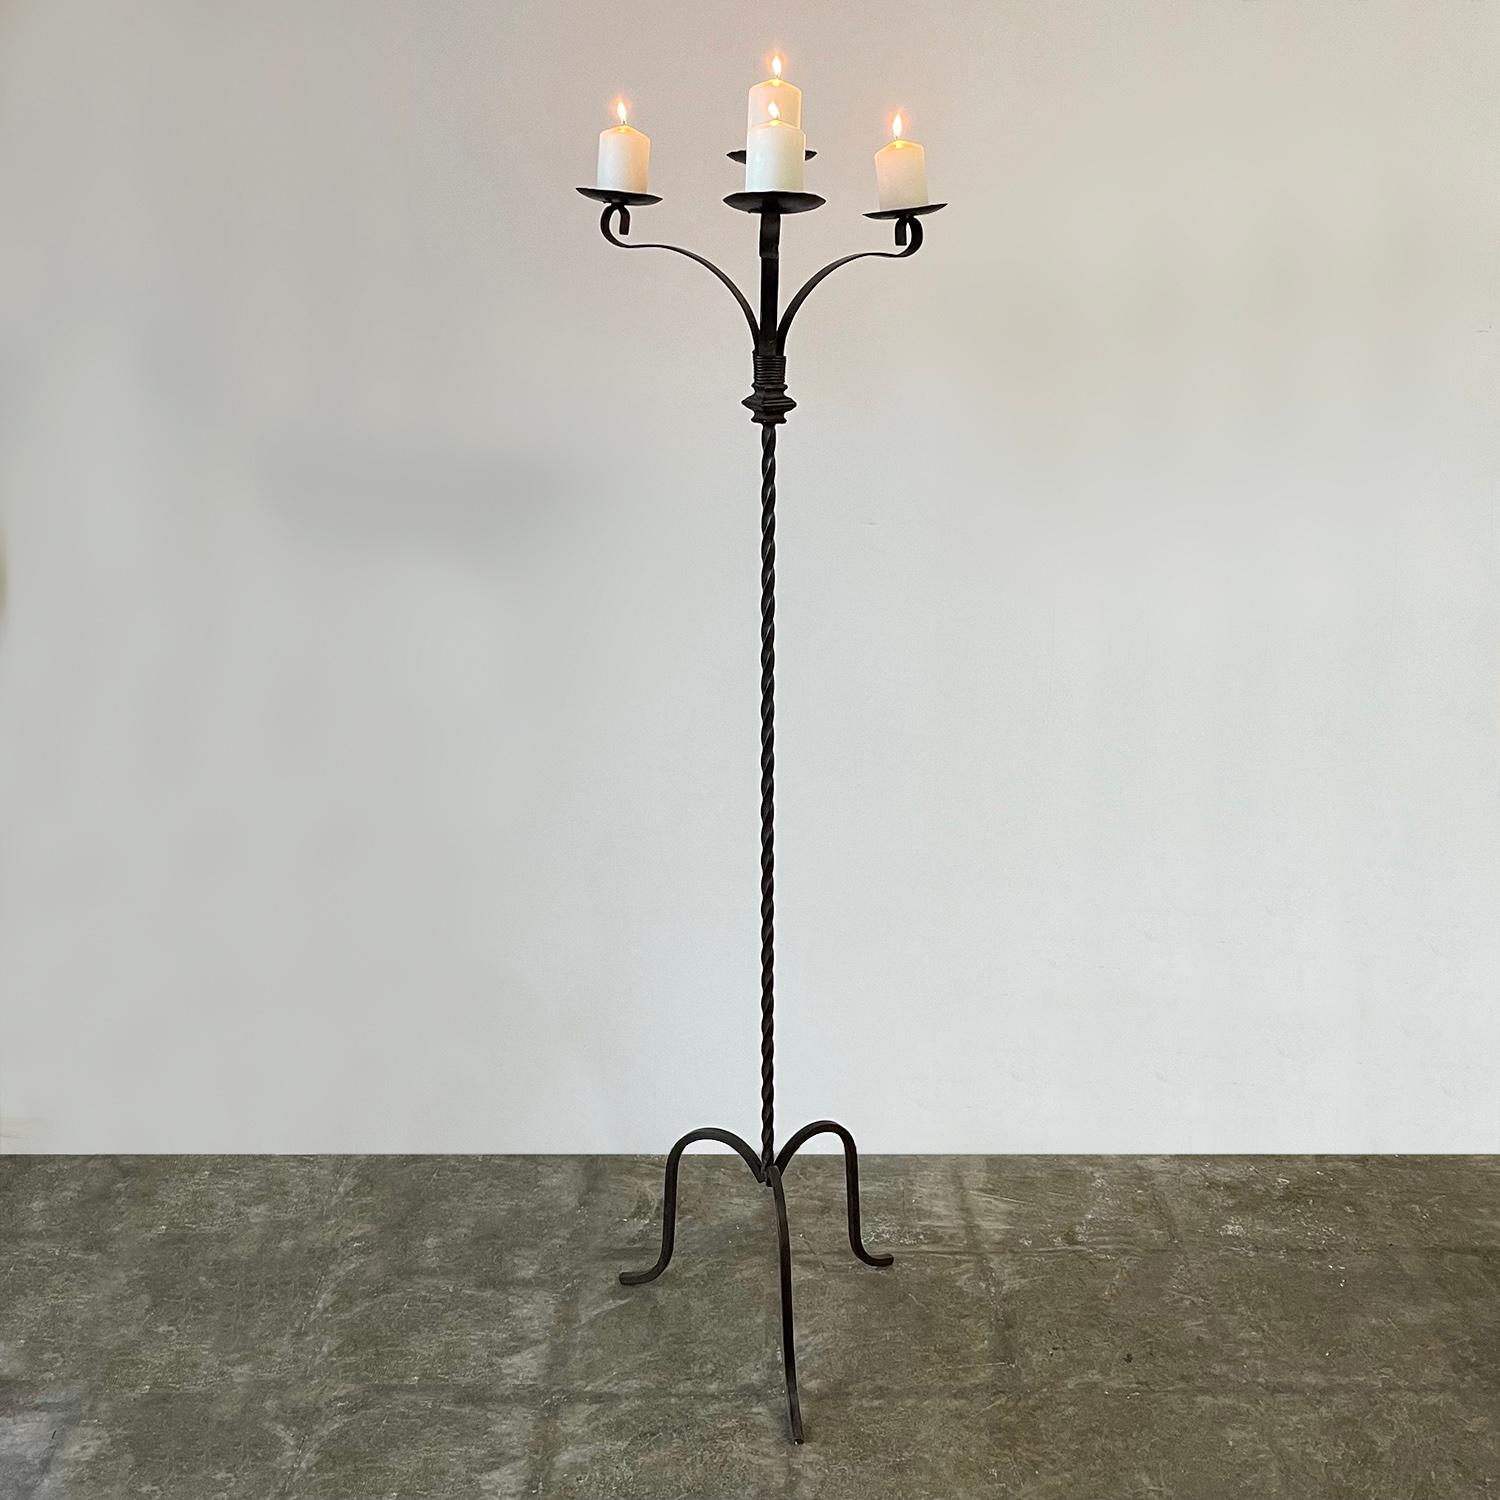 Spanish wrought iron torchiere standing candelabra
Early 20th century
Handcrafted rustic piece
Twisted wrought iron pillar supports four arms and floats on a high arched tripod base
Patina from age and use
Candles shown have a 4” diameter